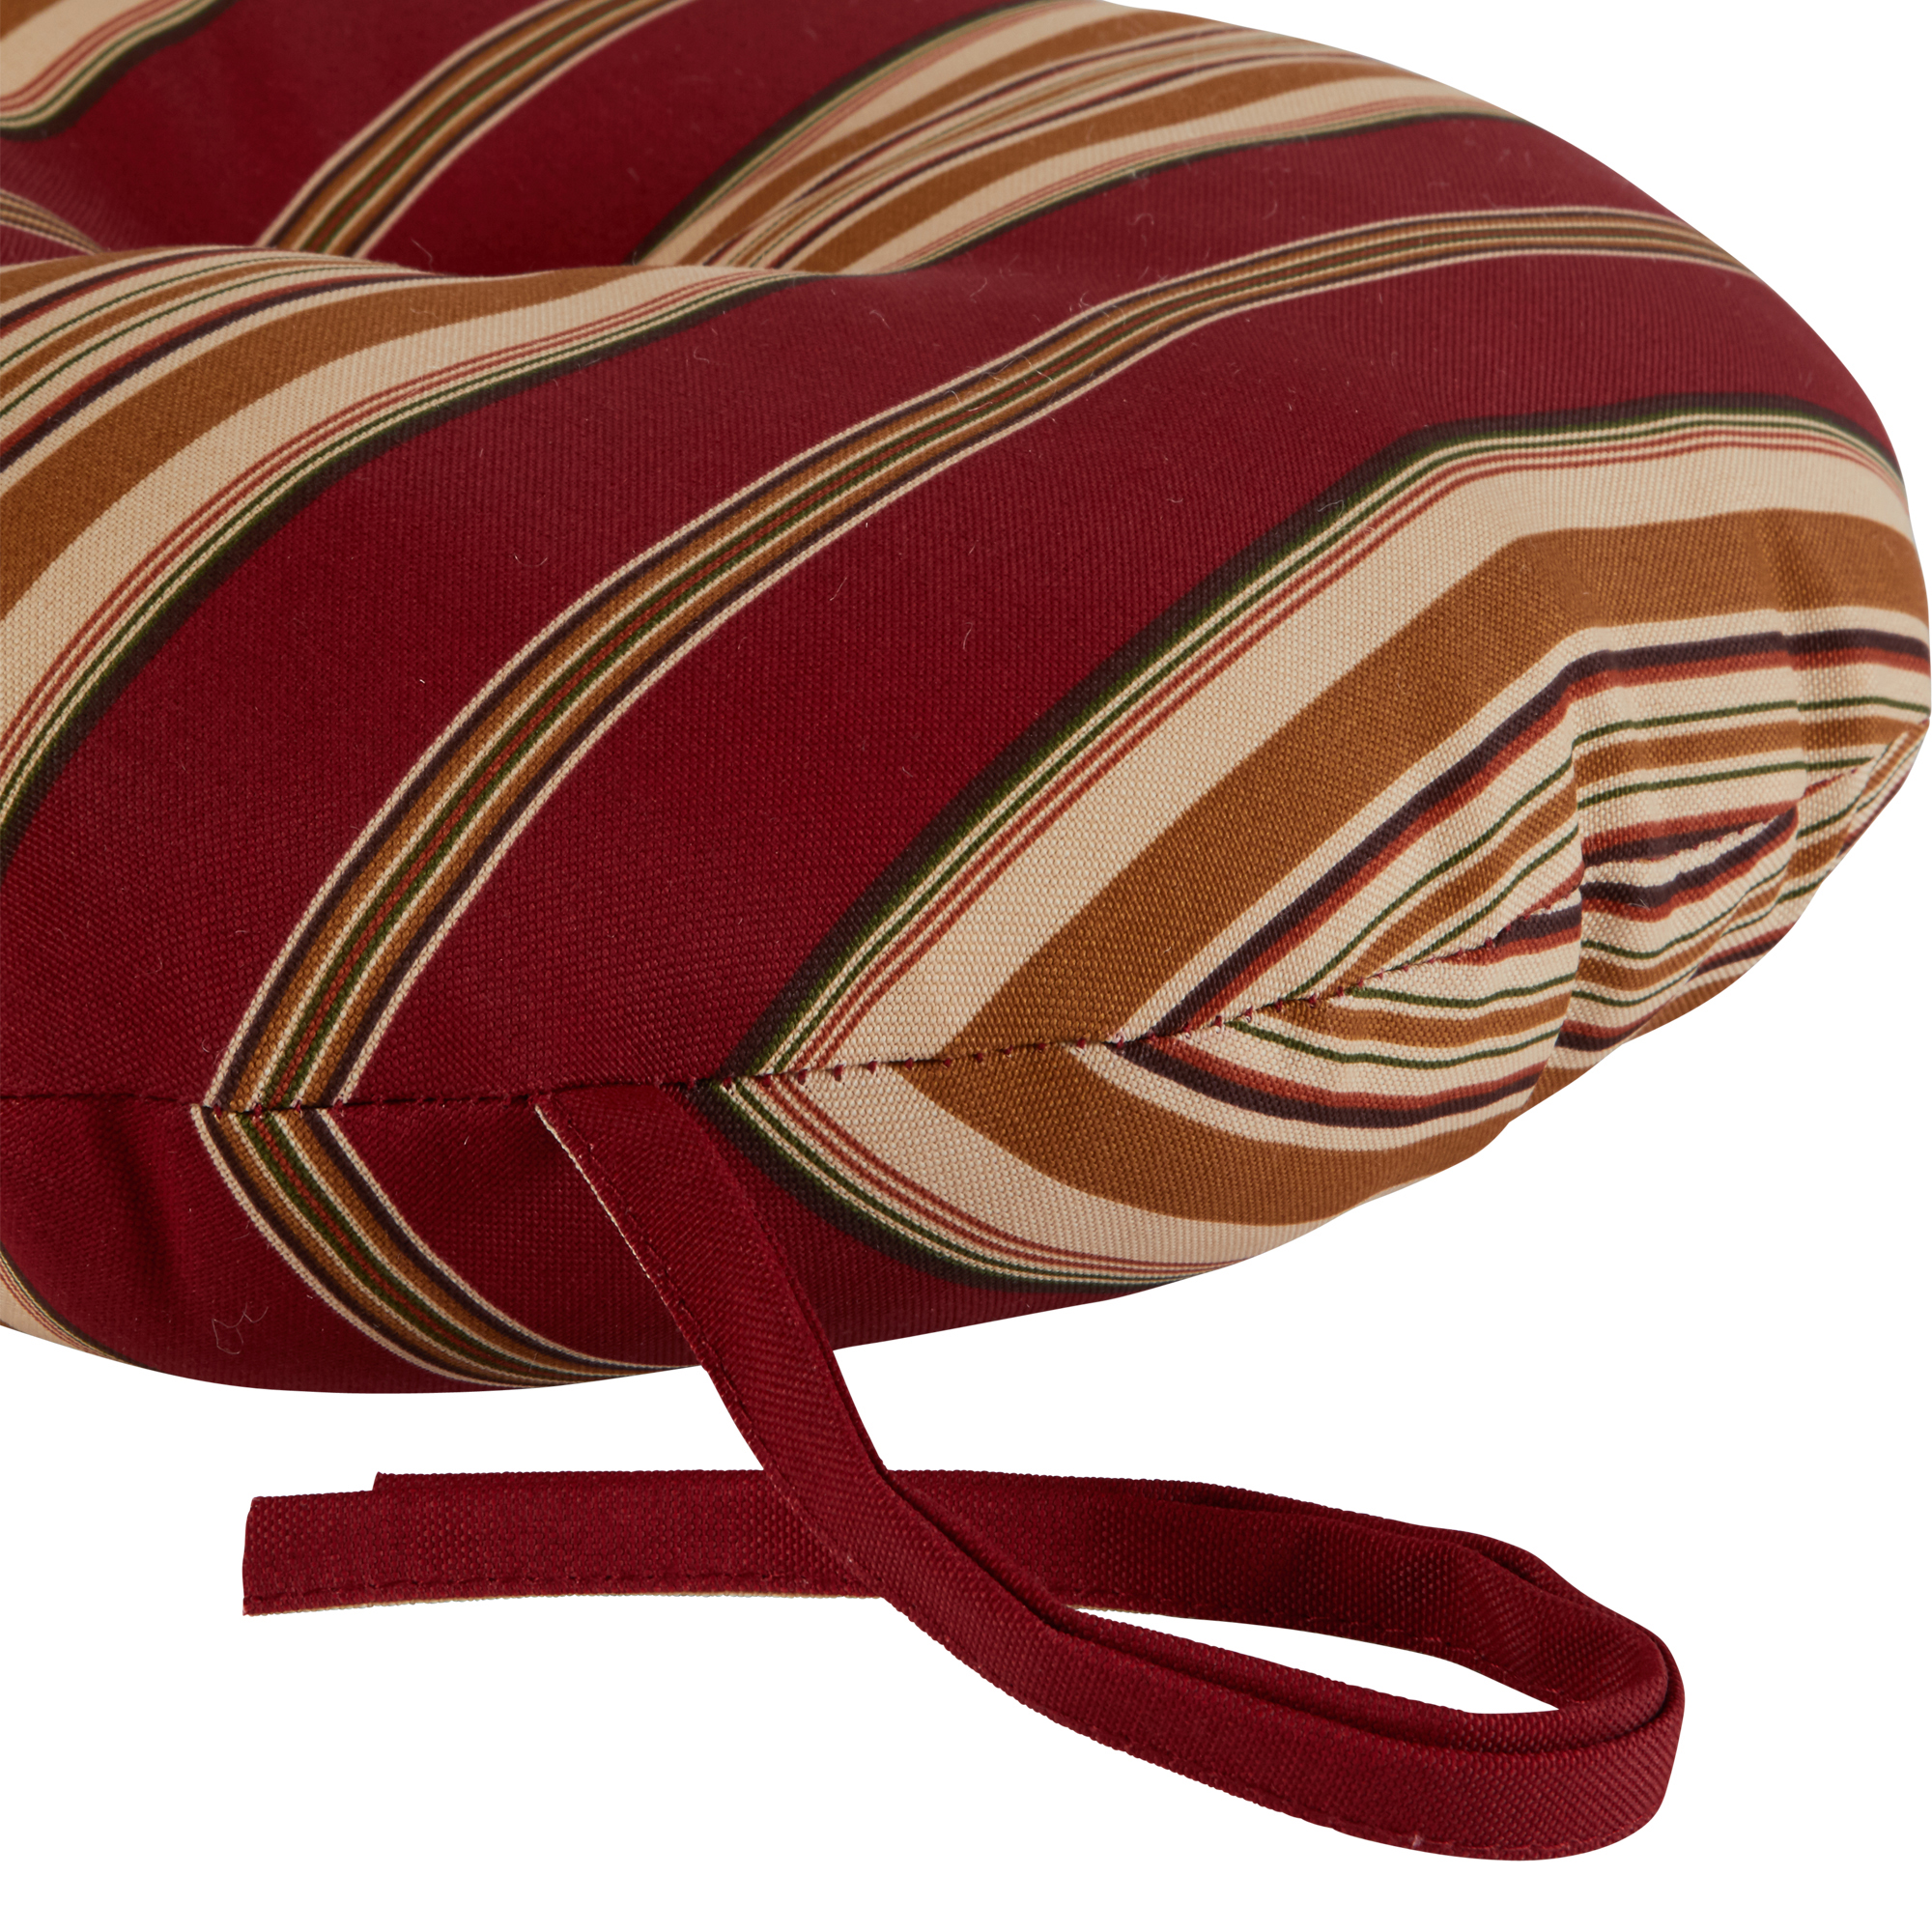 Greendale Home Fashions Roma Stripe 15 in. Round Outdoor Reversible Bistro Seat Cushion (Set of 2) - image 4 of 6